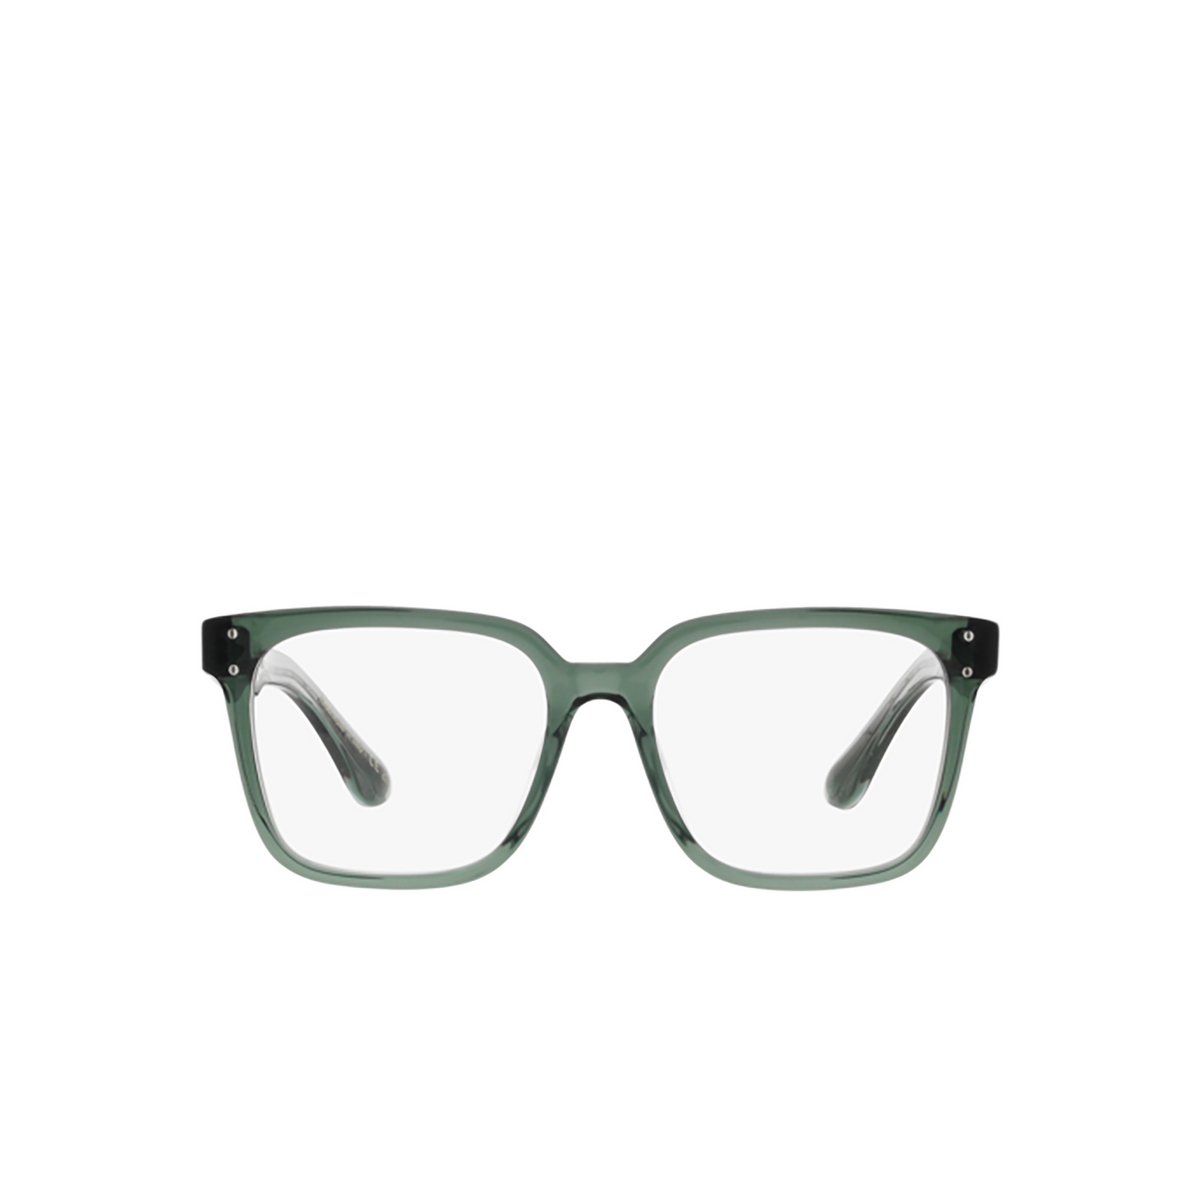 Occhiali da vista Oliver Peoples PARCELL 1547 Ivy - frontale